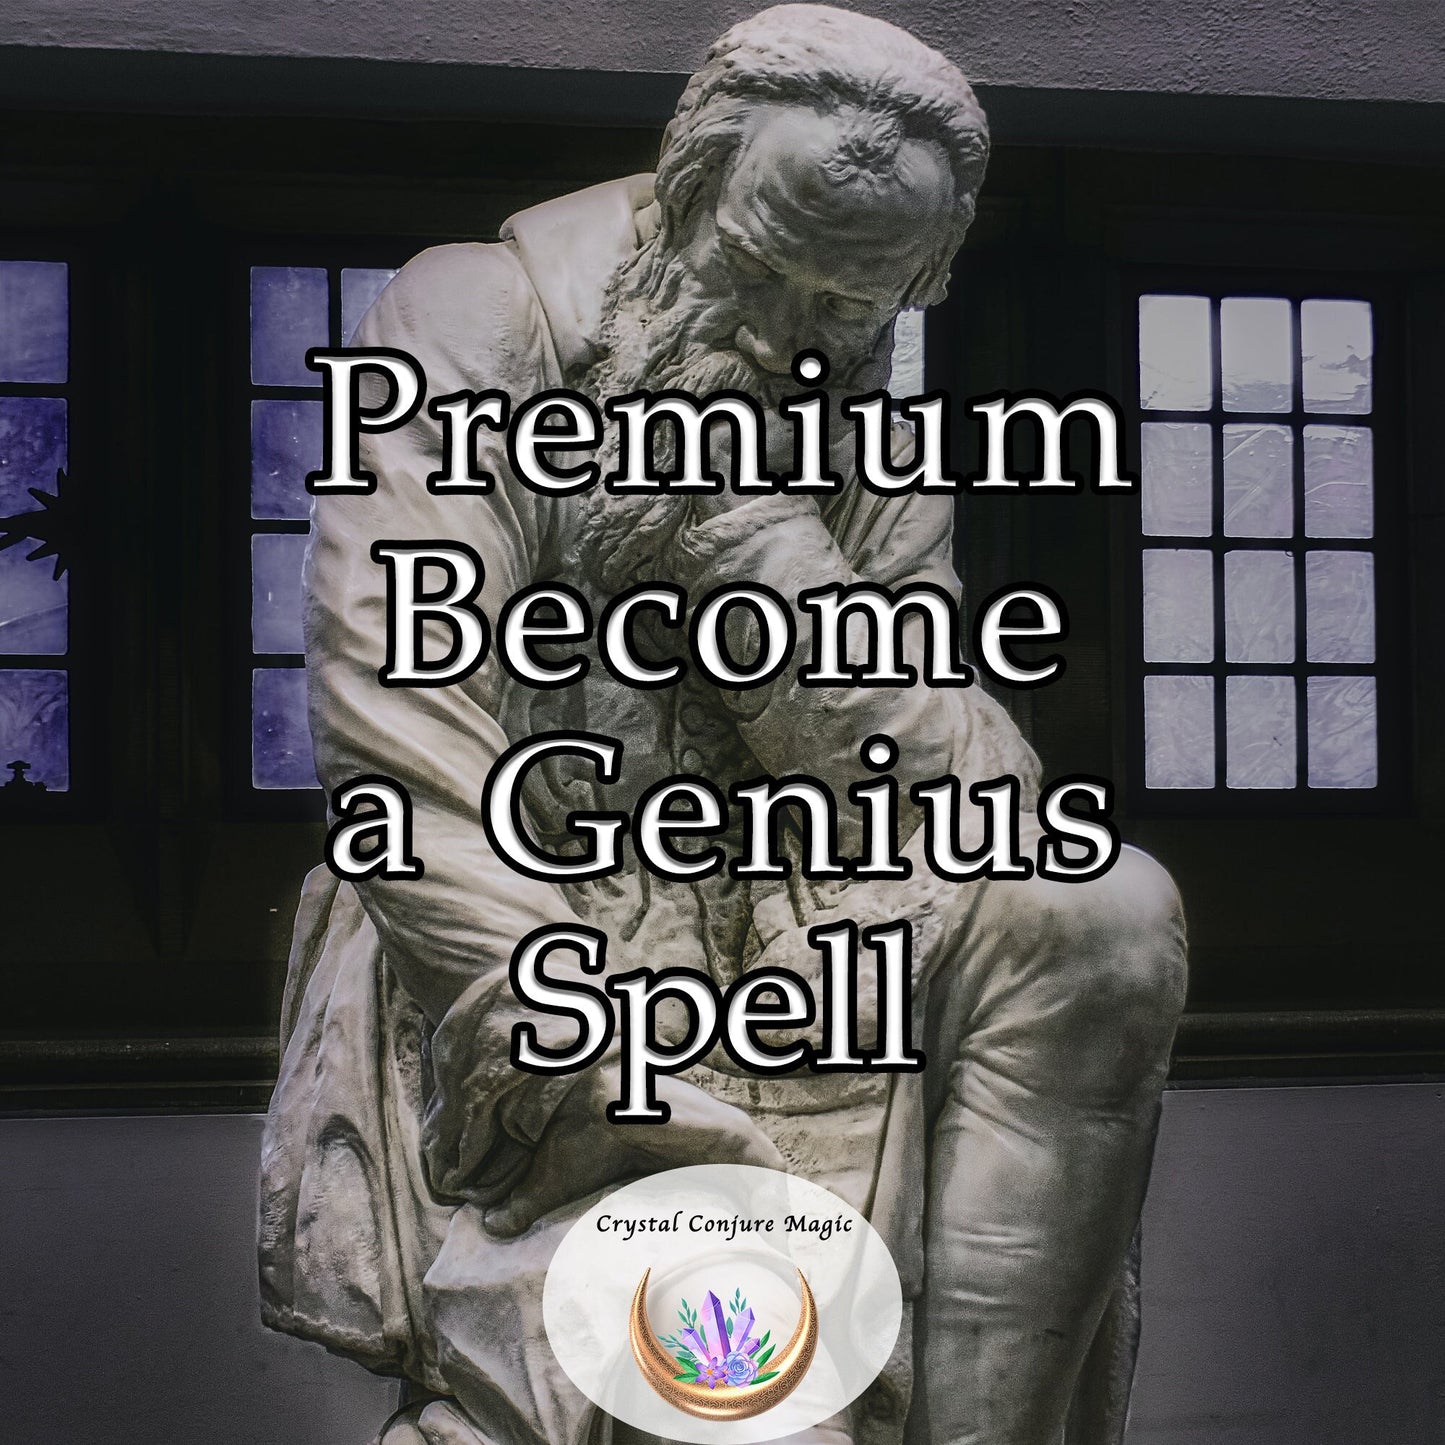 Premium Become a Genius - Free yourself from making dumb mistakes... Be the wise and smart person you really can be